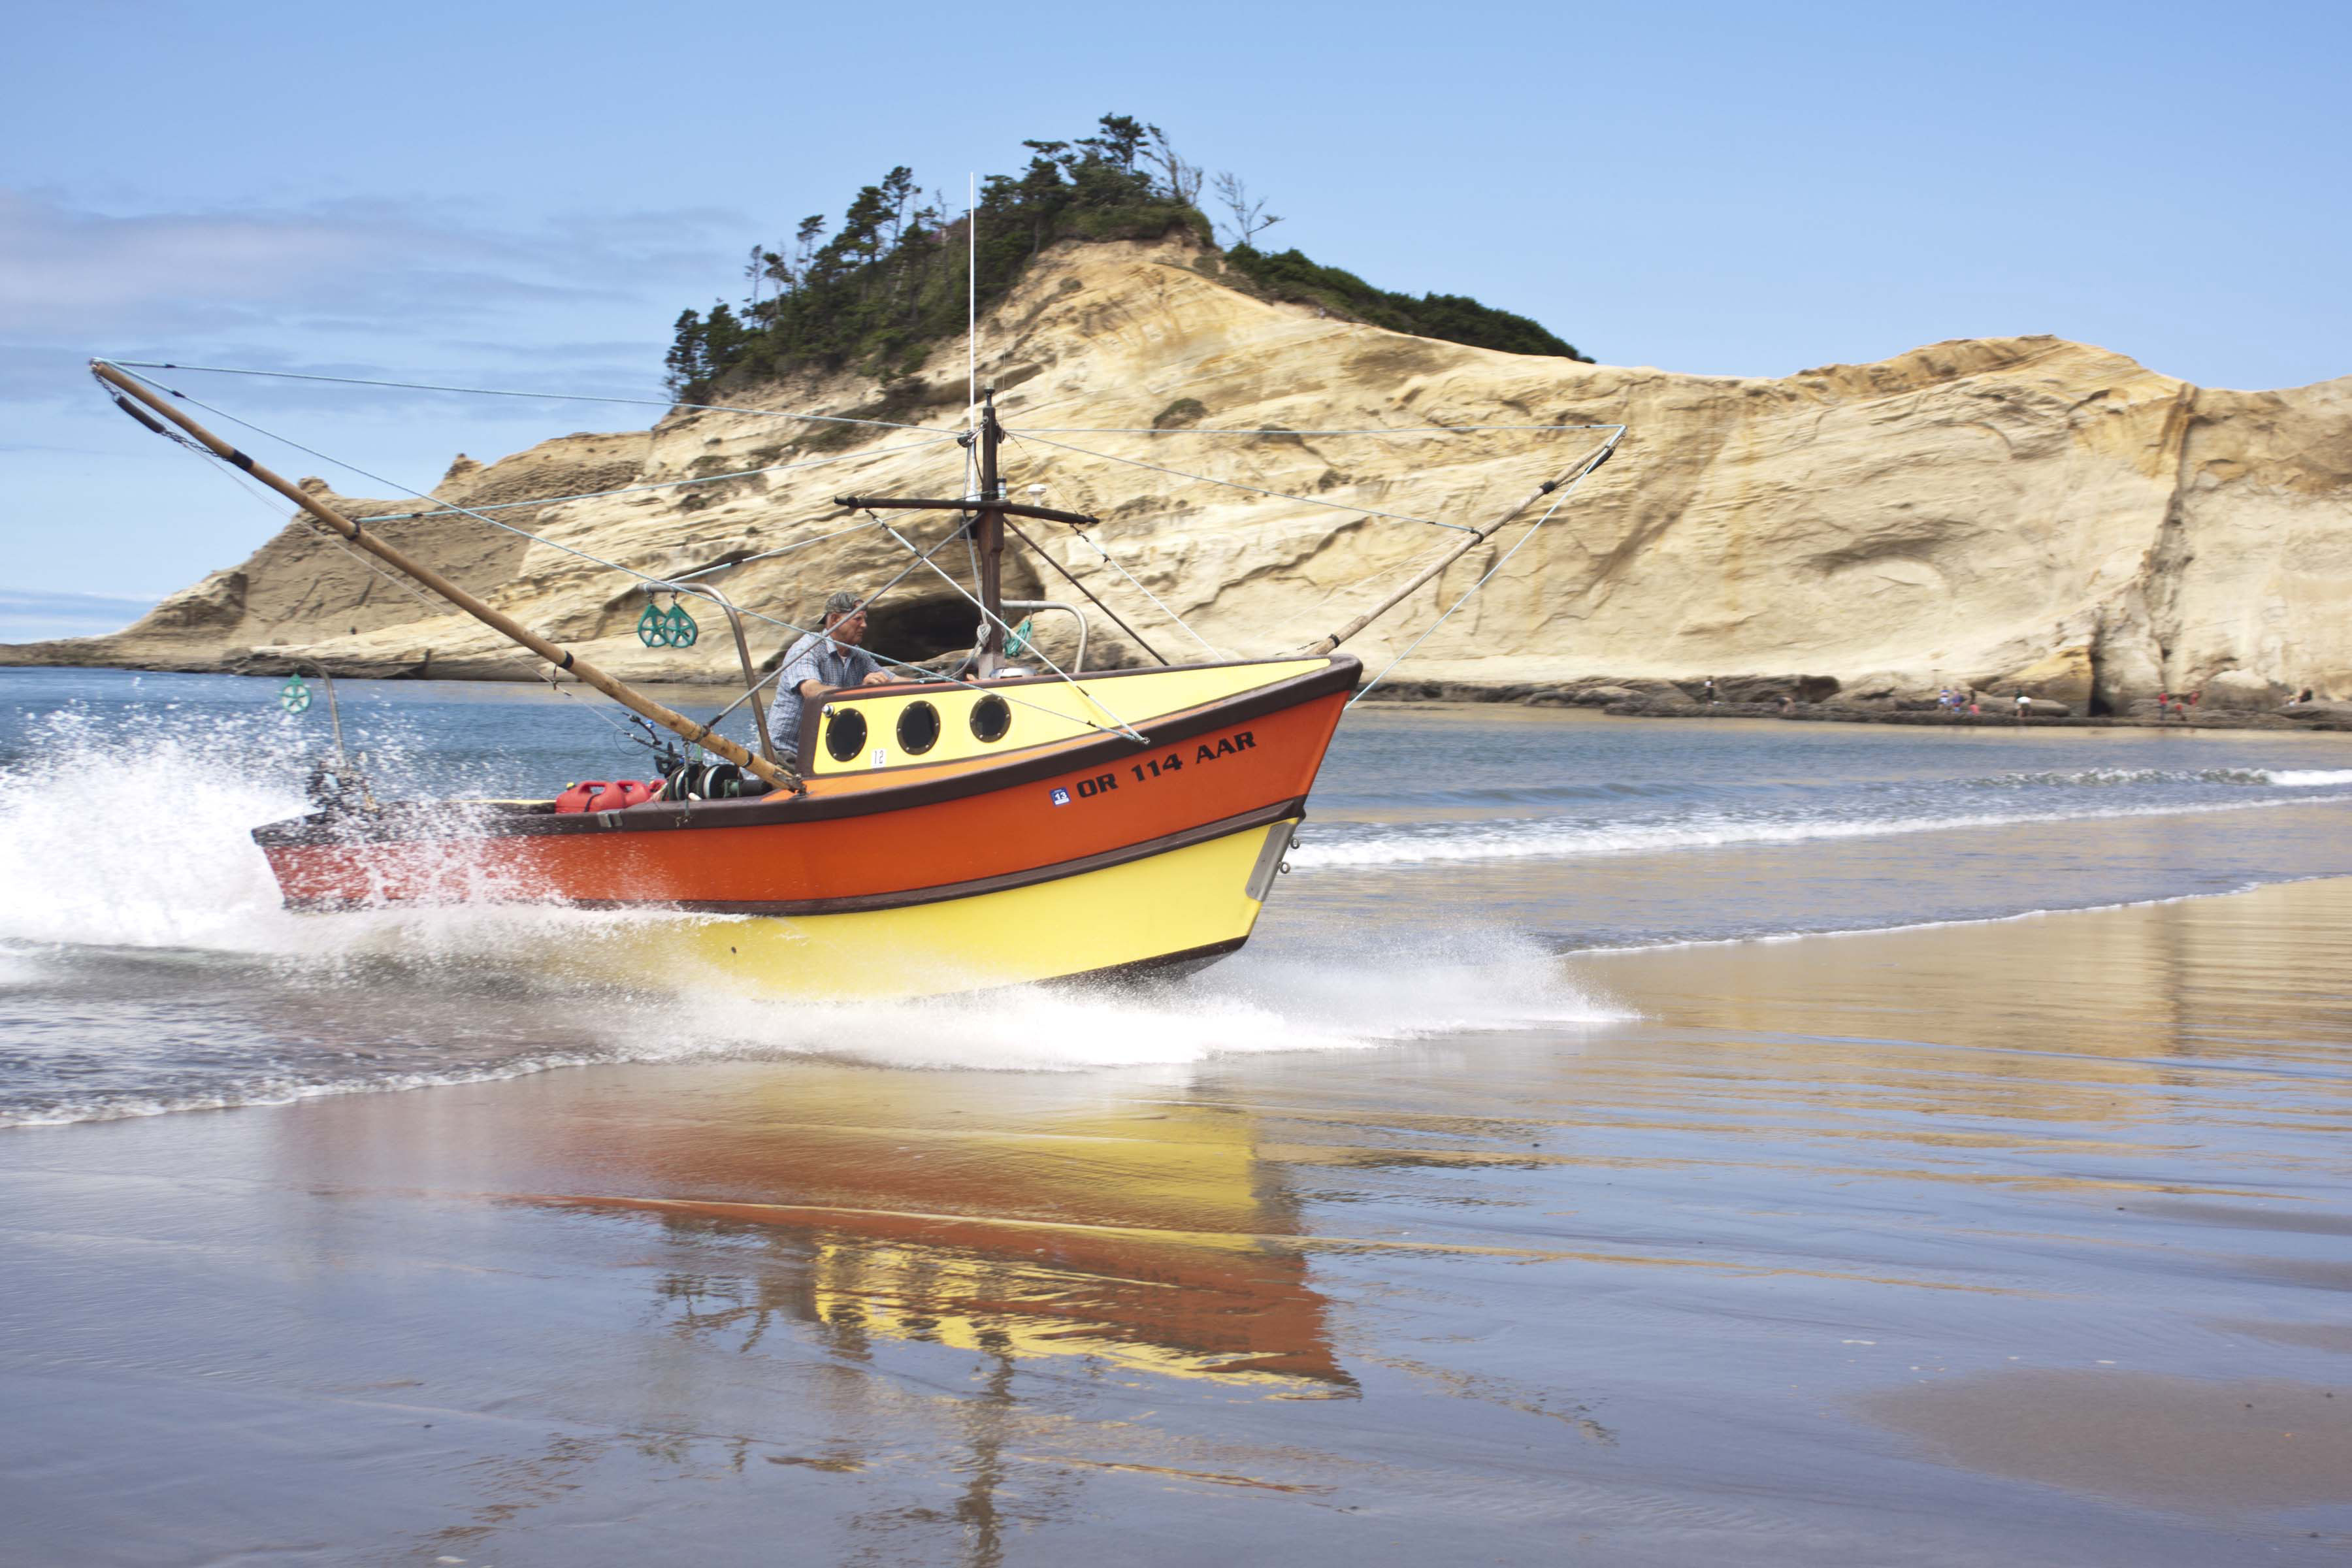 Launching through the Surf: The Dory Fleet of Pacific City